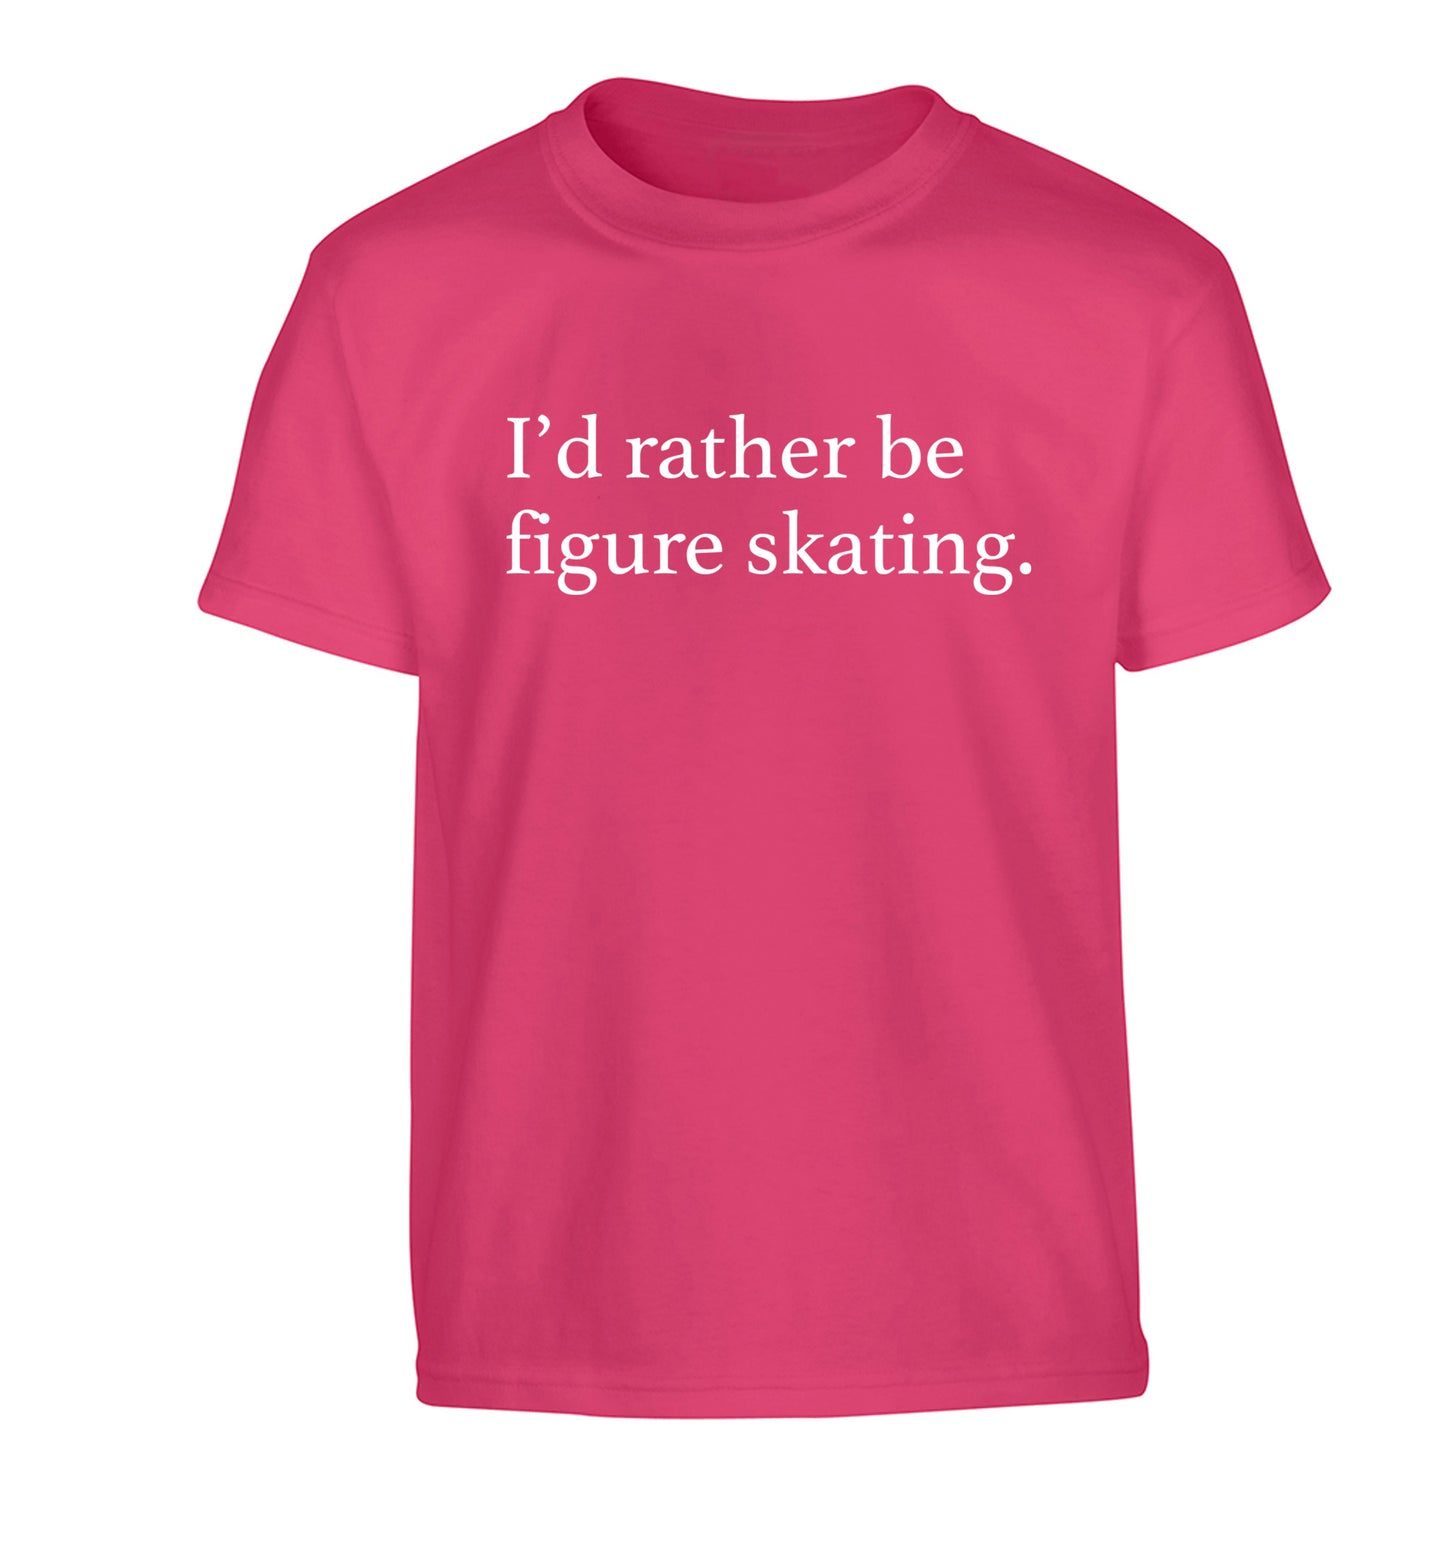 I'd rather be figure skating Children's pink Tshirt 12-14 Years